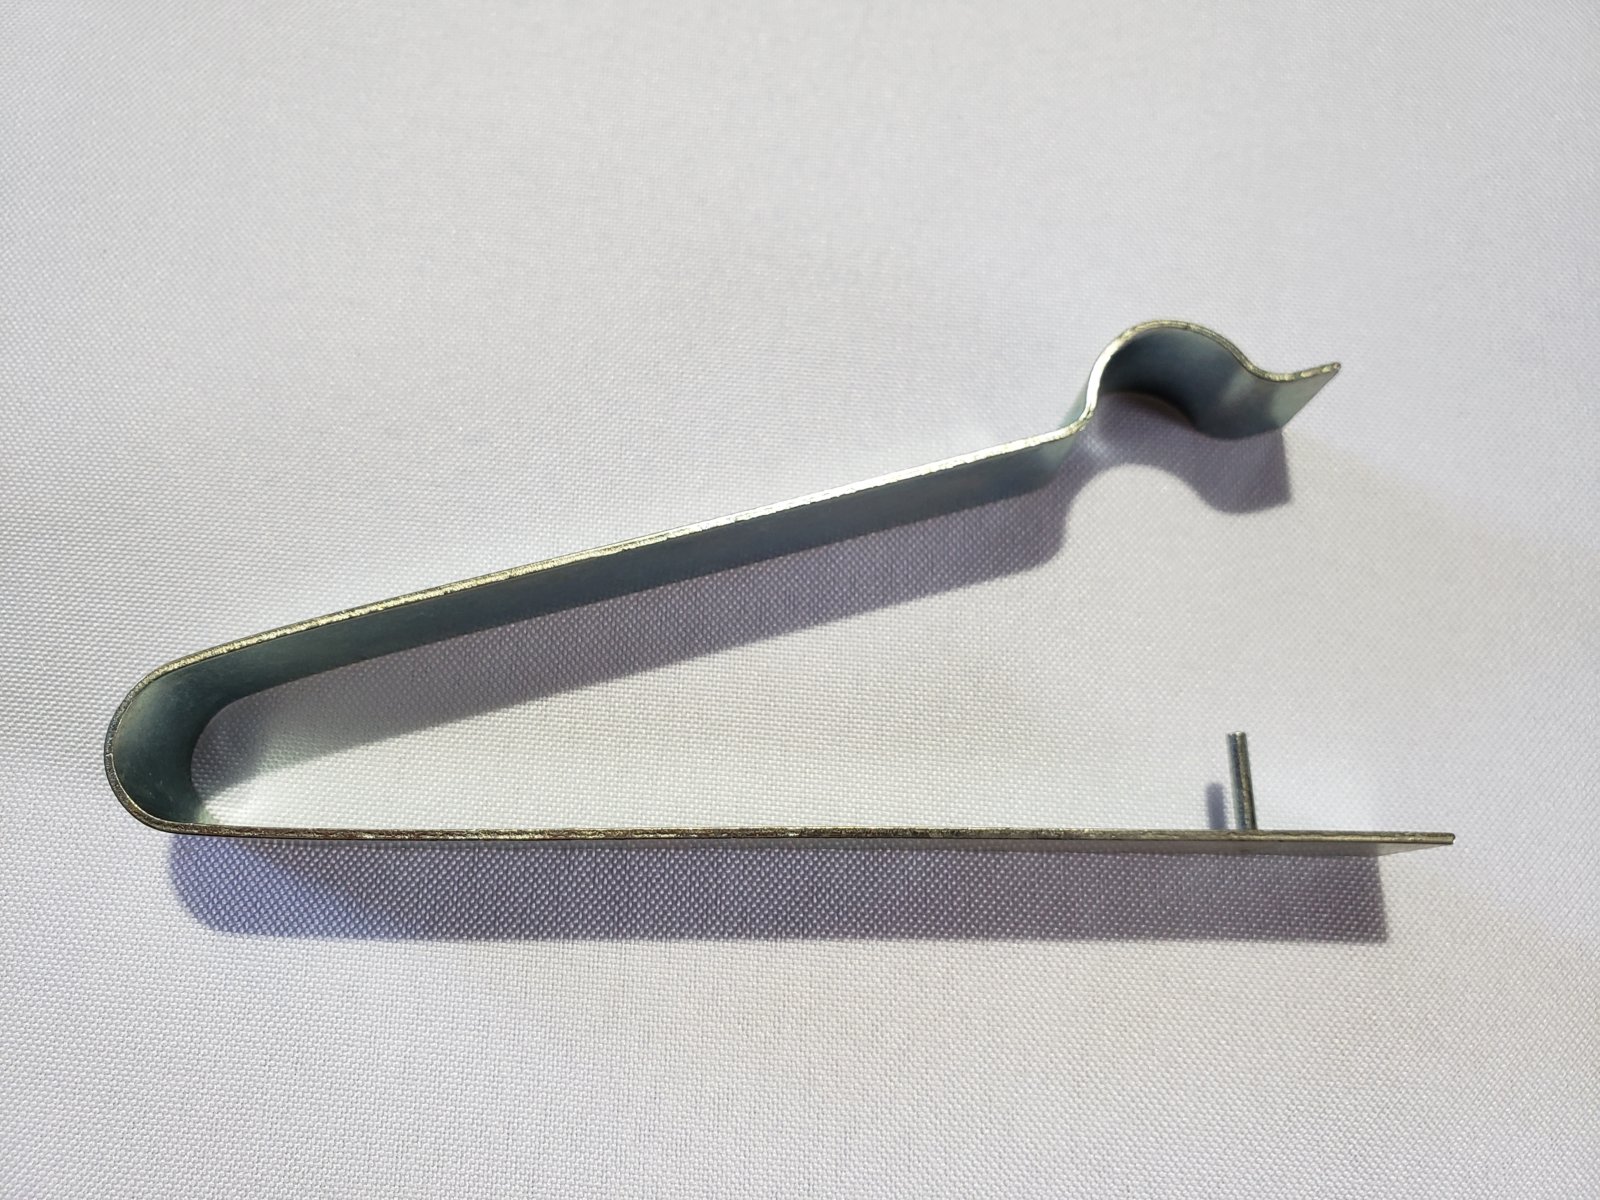 Punch Tool For Making Emmitter Holes in Drip Tubing